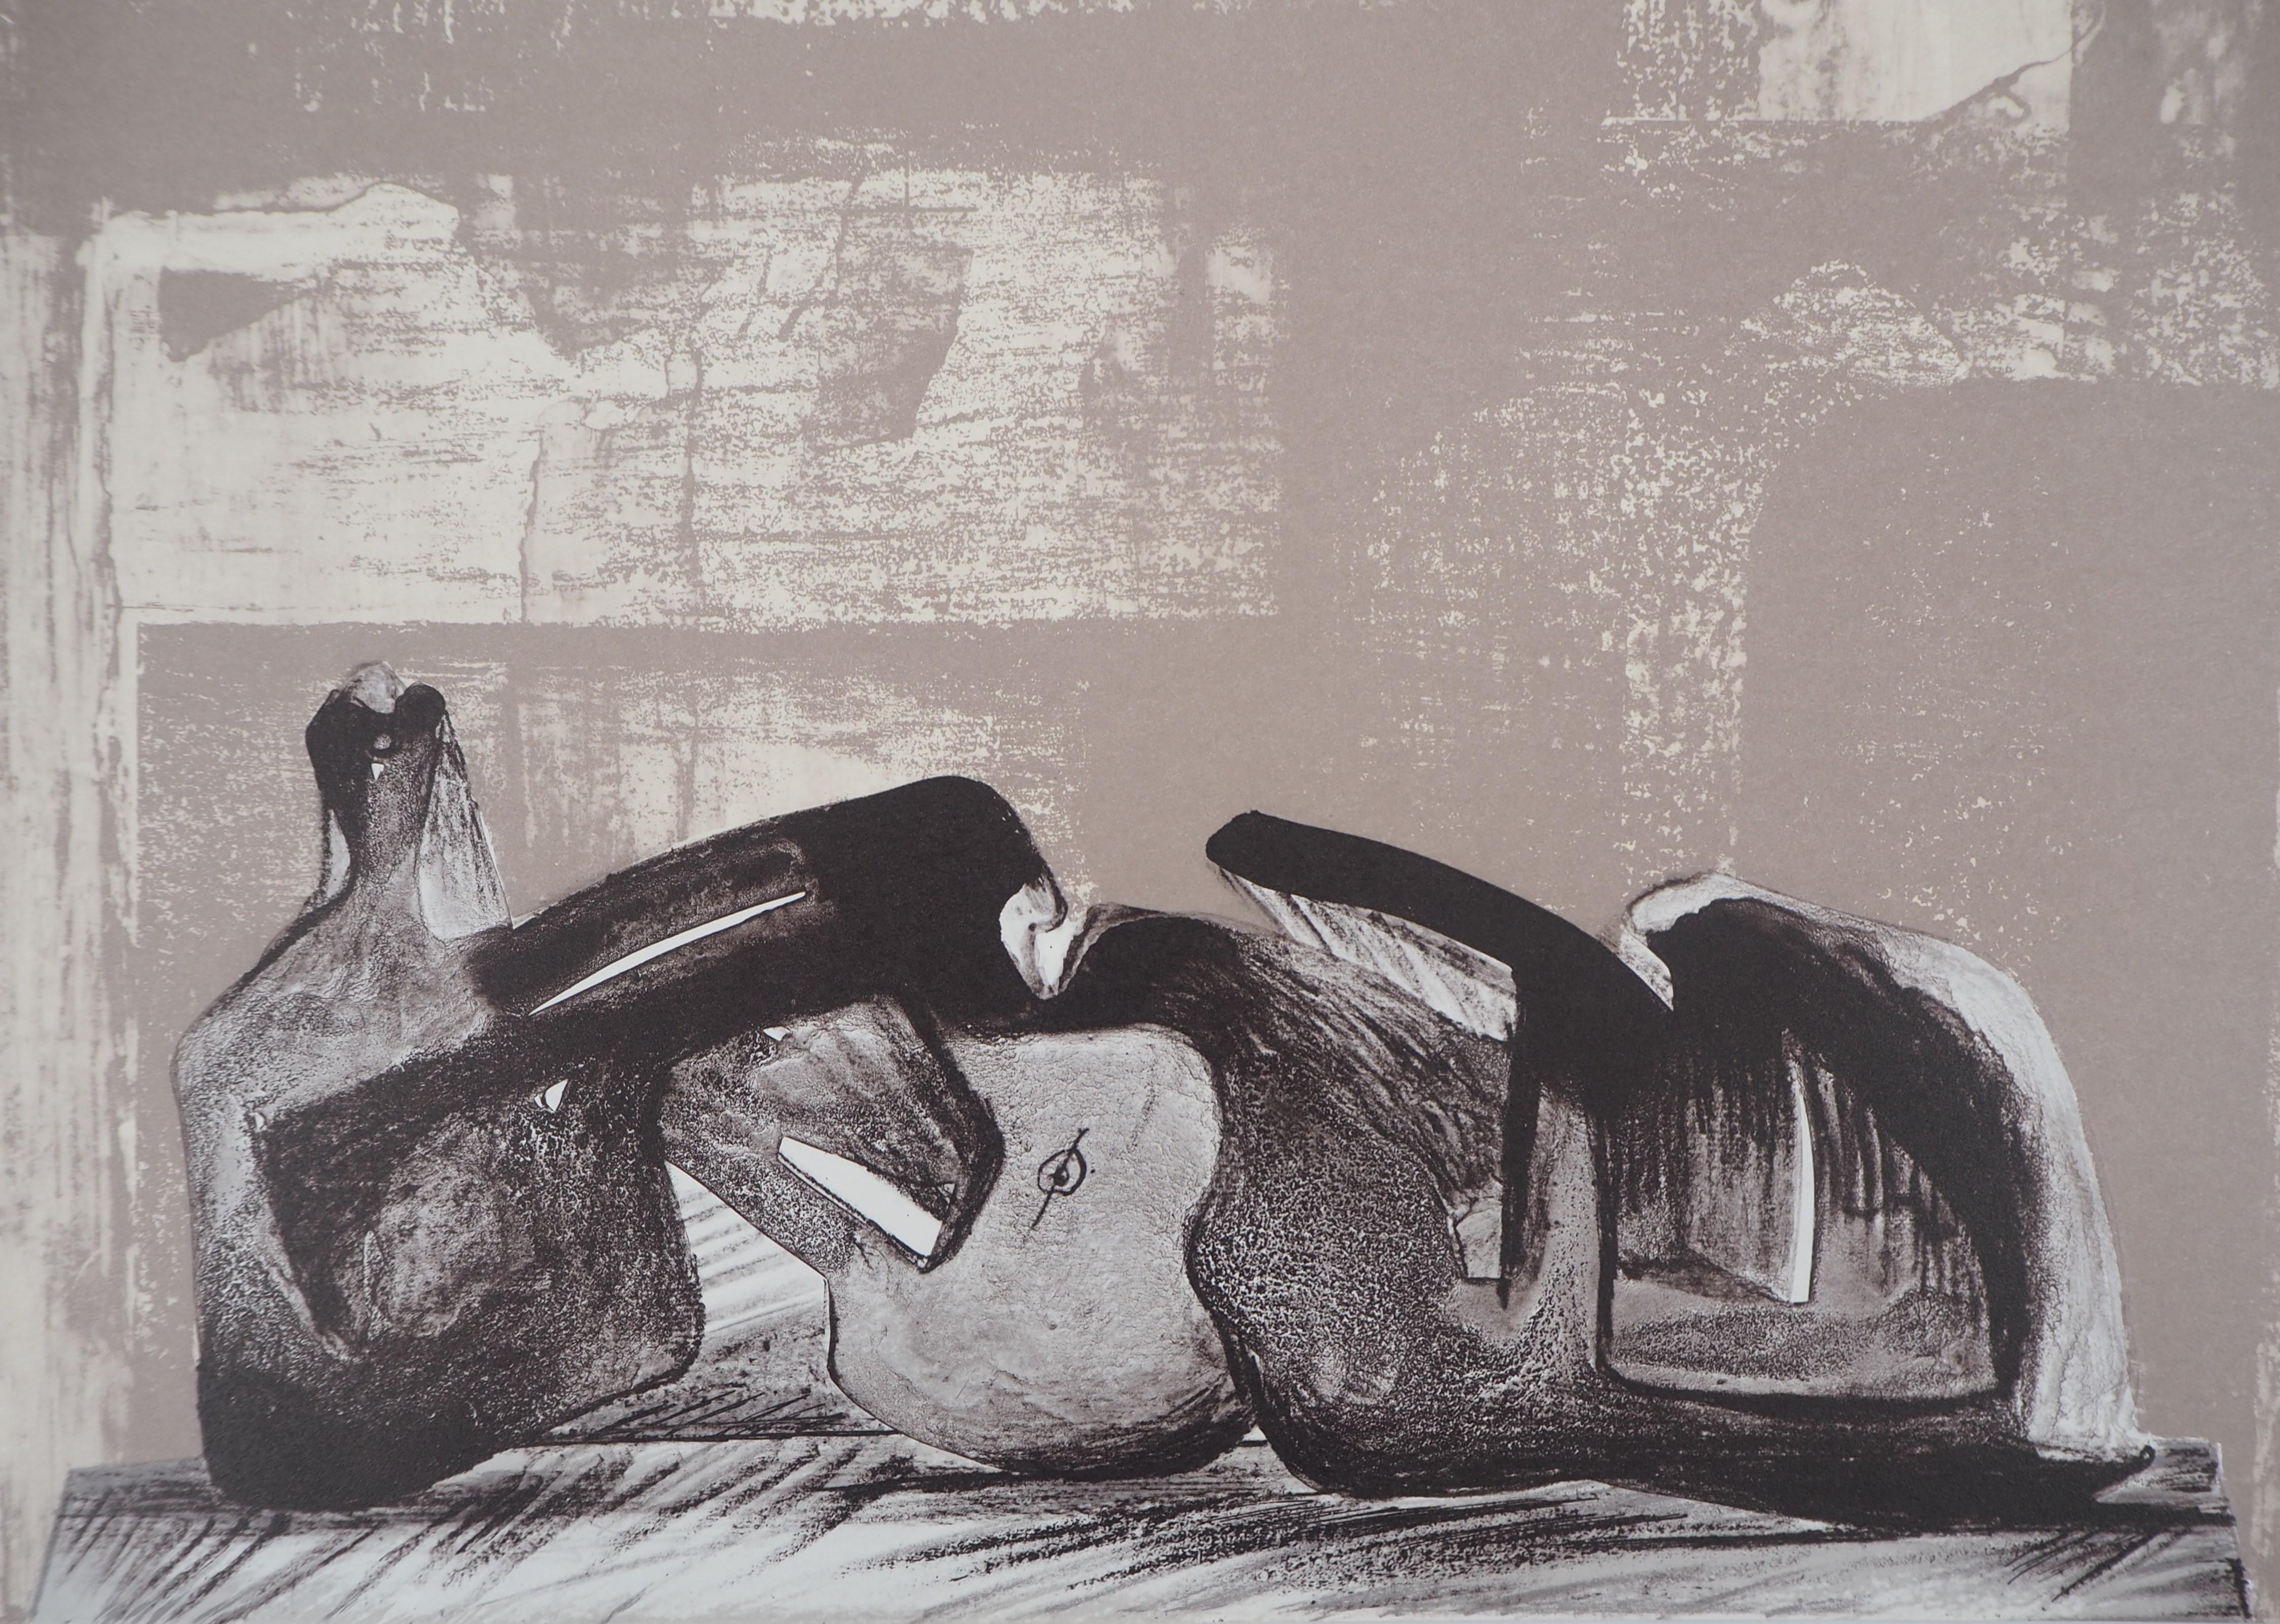 Reclining Figure - Original lithograph - Print by Henry Moore